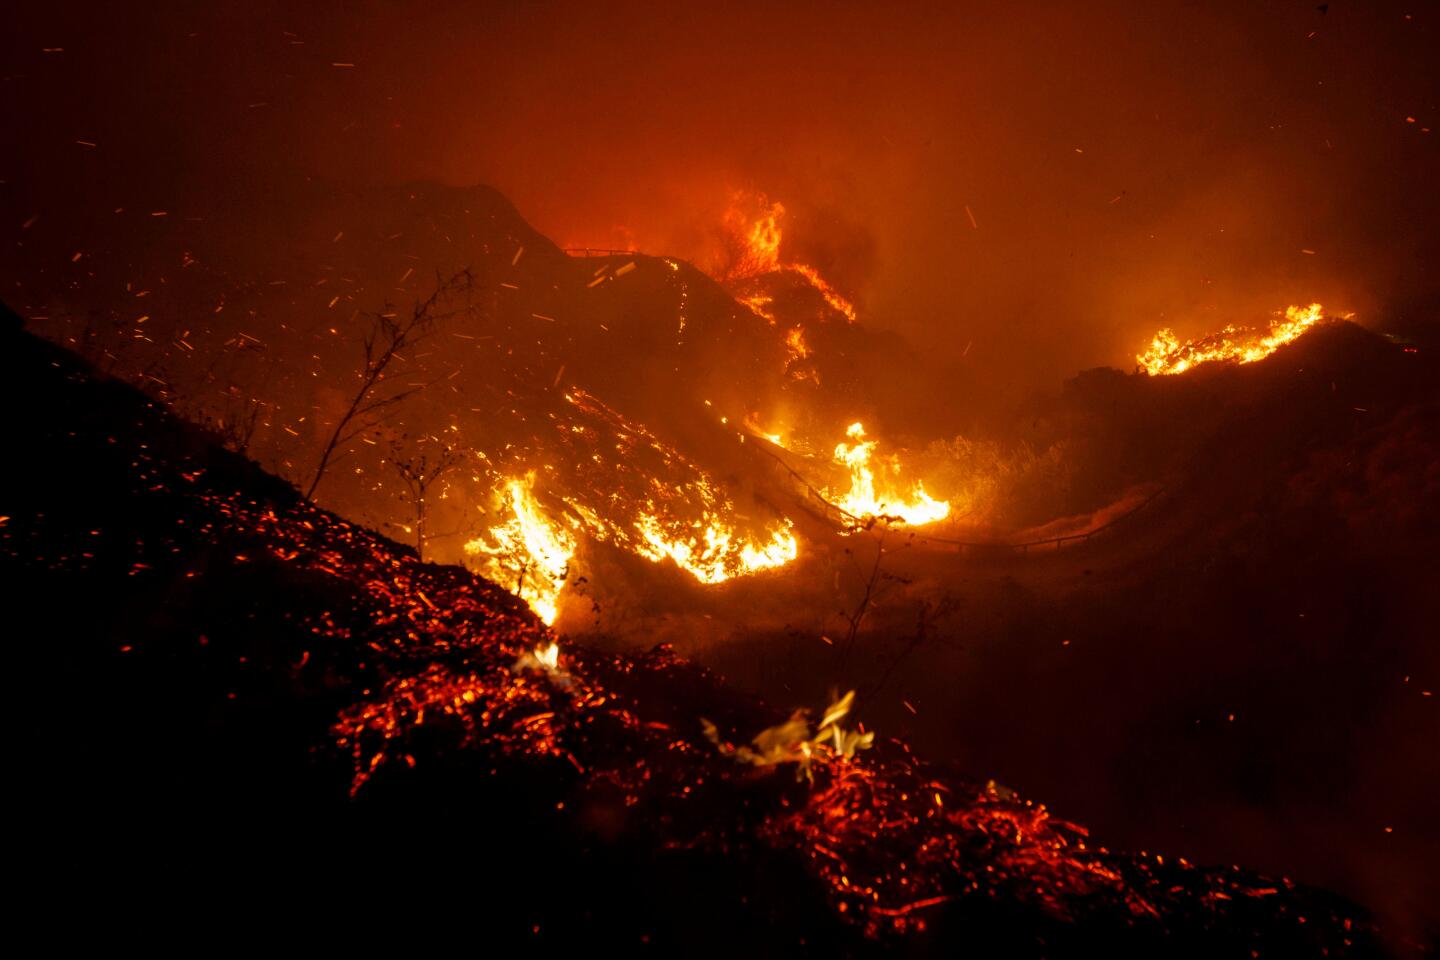 The Saddleridge fire burns in Wilbur Tampa Park near homes on Friday in the Porter Ranch neighborhood of Los Angeles.